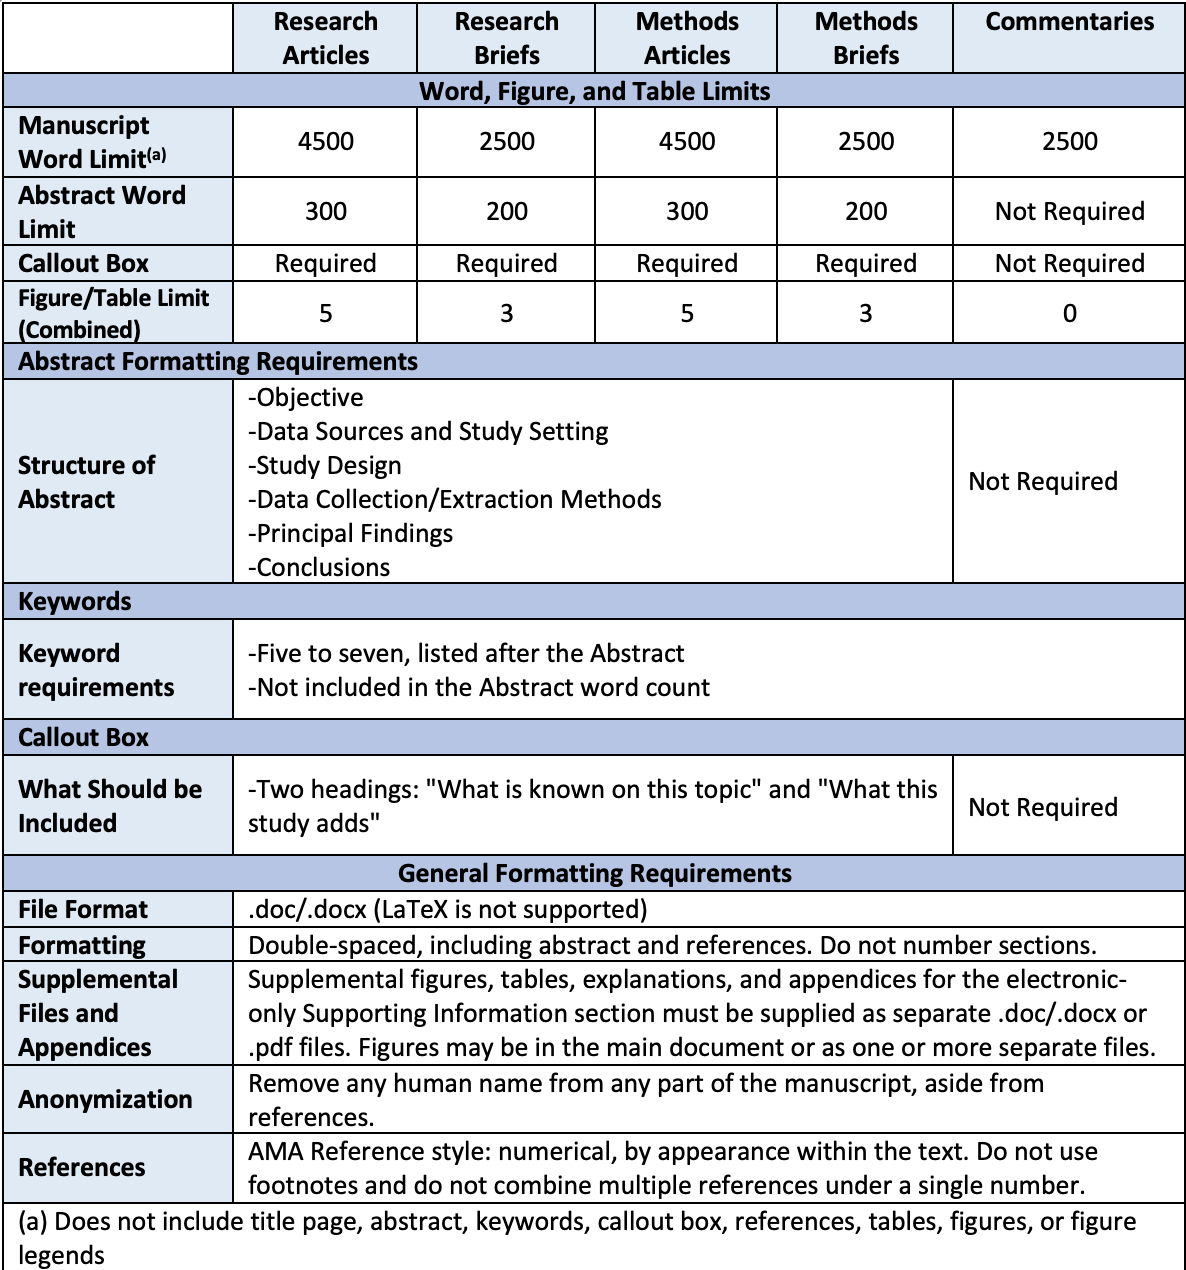 table describing requirements. Research articles: Manuscripts have a 4500 word limit, 300 word limit for abstracts, require a callout box, and have a combined limit of 5 tables and figures. Research briefs: Manuscripts have a 2500 word limit, 200 word limit for abstracts, require a callout box, and have a combined limit of 3 tables and figures. Methods Articles Manuscripts have a 4500 word limit, 300 word limit for abstracts, require a callout box, and have a combined limit of 5 tables and figures. Methods Briefs Manuscripts have a 2500 word limit, 200 word limit for abstracts, require a callout box, and have a combined limit of 3 tables and figures. Commentaries: Manuscripts have a 2500 word limit, abstracts and callout boxes are not required, and have 0 figures and tables. Abstract formatting requirements: Structure of Abstract should include: Objective, Data Sources and Study Setting, Study Design,, Data Collection/Extraction Methods, Principal Findings, and Conclusions. Commentaries have no required structure. Keywords: Five to seven keywords are required; listed after the Abstract; not included in the Abstract word count. Callout Box should include: Two headings: 'What is known on this topic' and 'What this study adds'; General Formatting requirements - File Format: /doc/.docx(LaTeX is not supported); Formatting: Double-spaced, including abstract and references. Do not number sections.Supplemental Files and Appendices: Supplemental figures, tables, explanations and appendices for the electronic-only Supporting information section must be supplied as a separate .doc/.docx or .pdf files. Figures may be in the main document or as on or more separate files. Anonymization: Remove any human name from any part of the manuscript, aside from references. References: AMA References style: numberical, by appearance within the text. Do not use footnotes and do not combine multiple references under a single number. Note: Manuscript word limit does not include title page, abstract, keywords, callout box, references, tables, figures, or figure legends